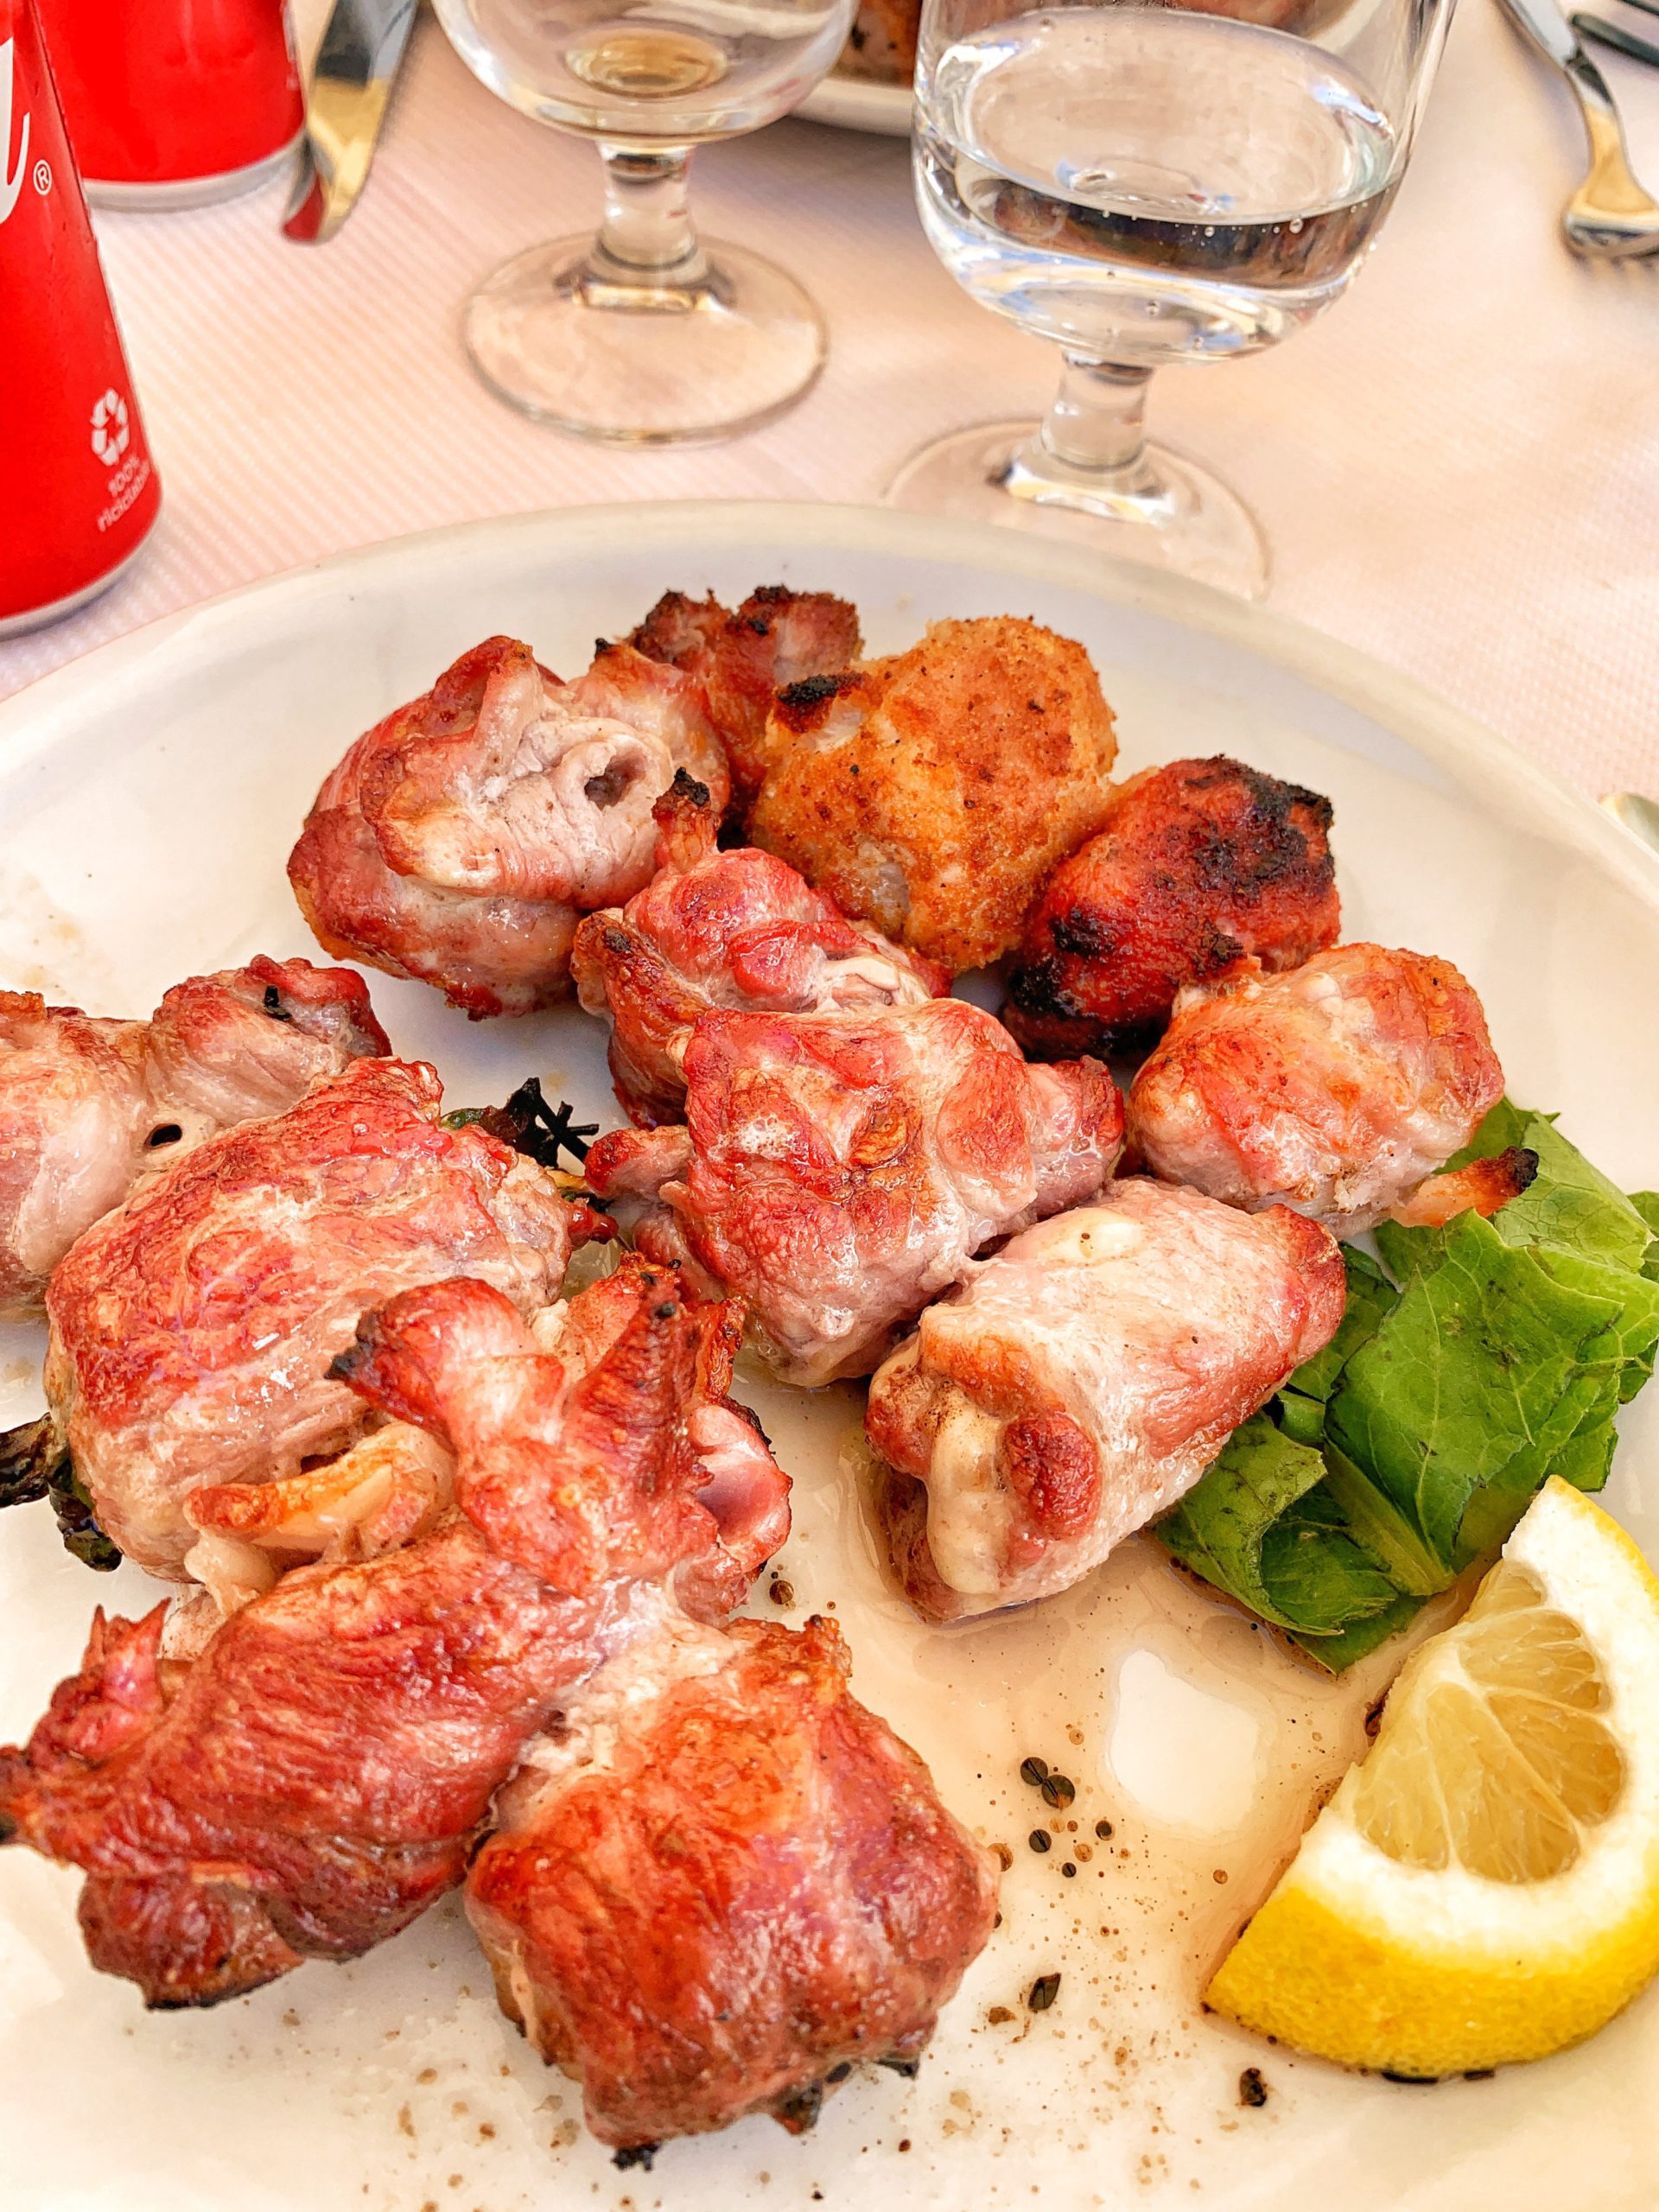 Bombette - a local speciality of Cisternino in Puglia - are delicious meat parcels. 